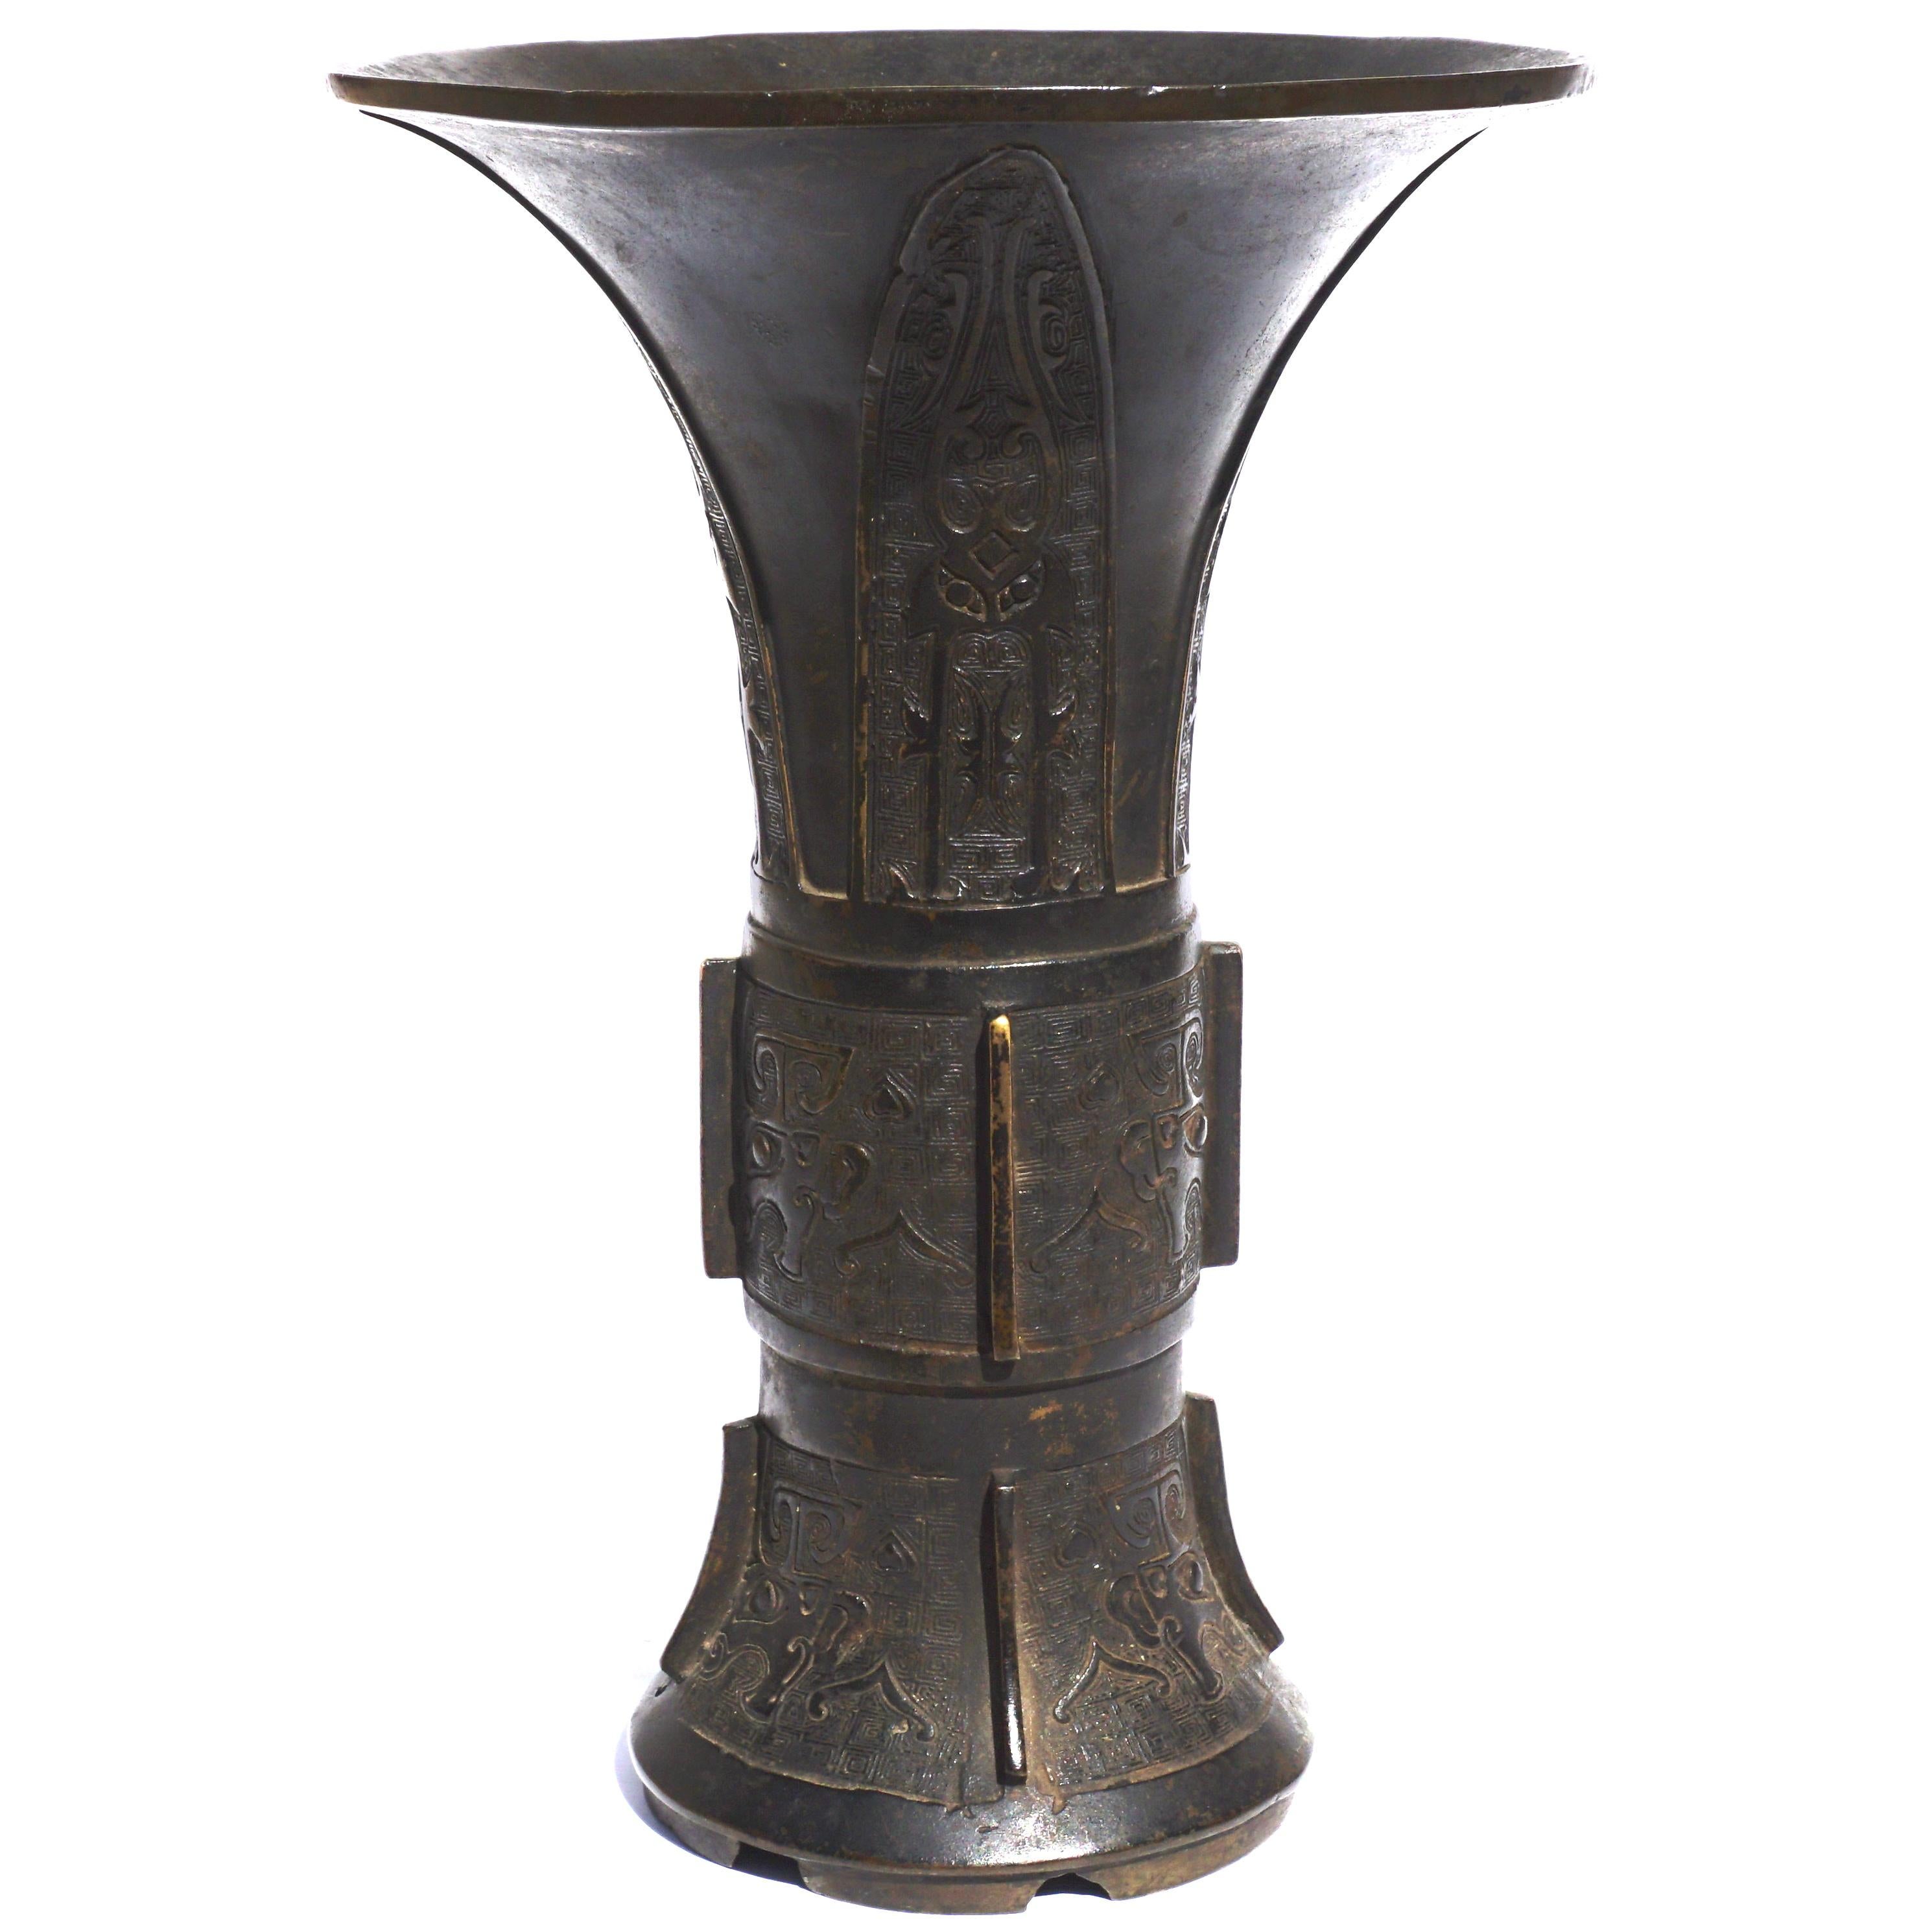 Chinese bronze vase, Gu, the trumpet-shaped upper section cast with four blades filled with archaic designs. Center and lower sections depicting Toadies with very intricate backgrounds. With a nice old rich dark patina. Circa 17th century; Late Ming